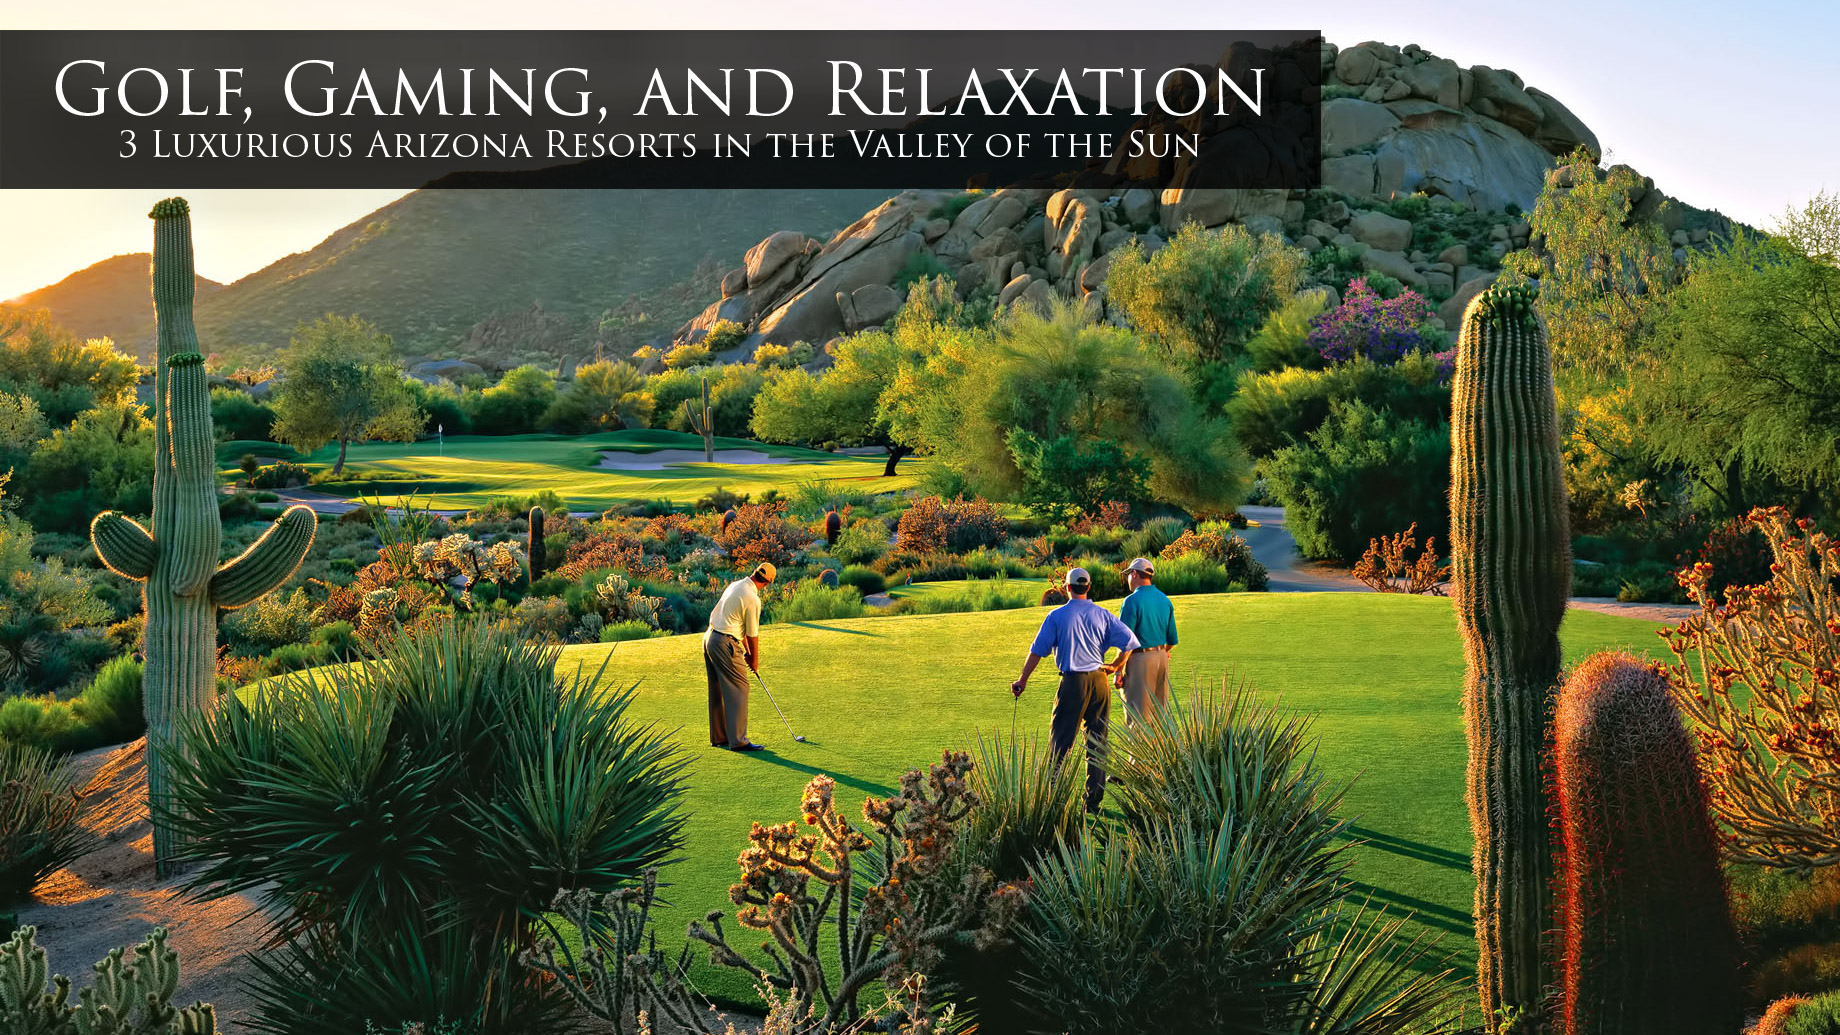 Golf, Gaming, and Relaxation – 3 Luxurious Arizona Resorts in the Valley of the Sun